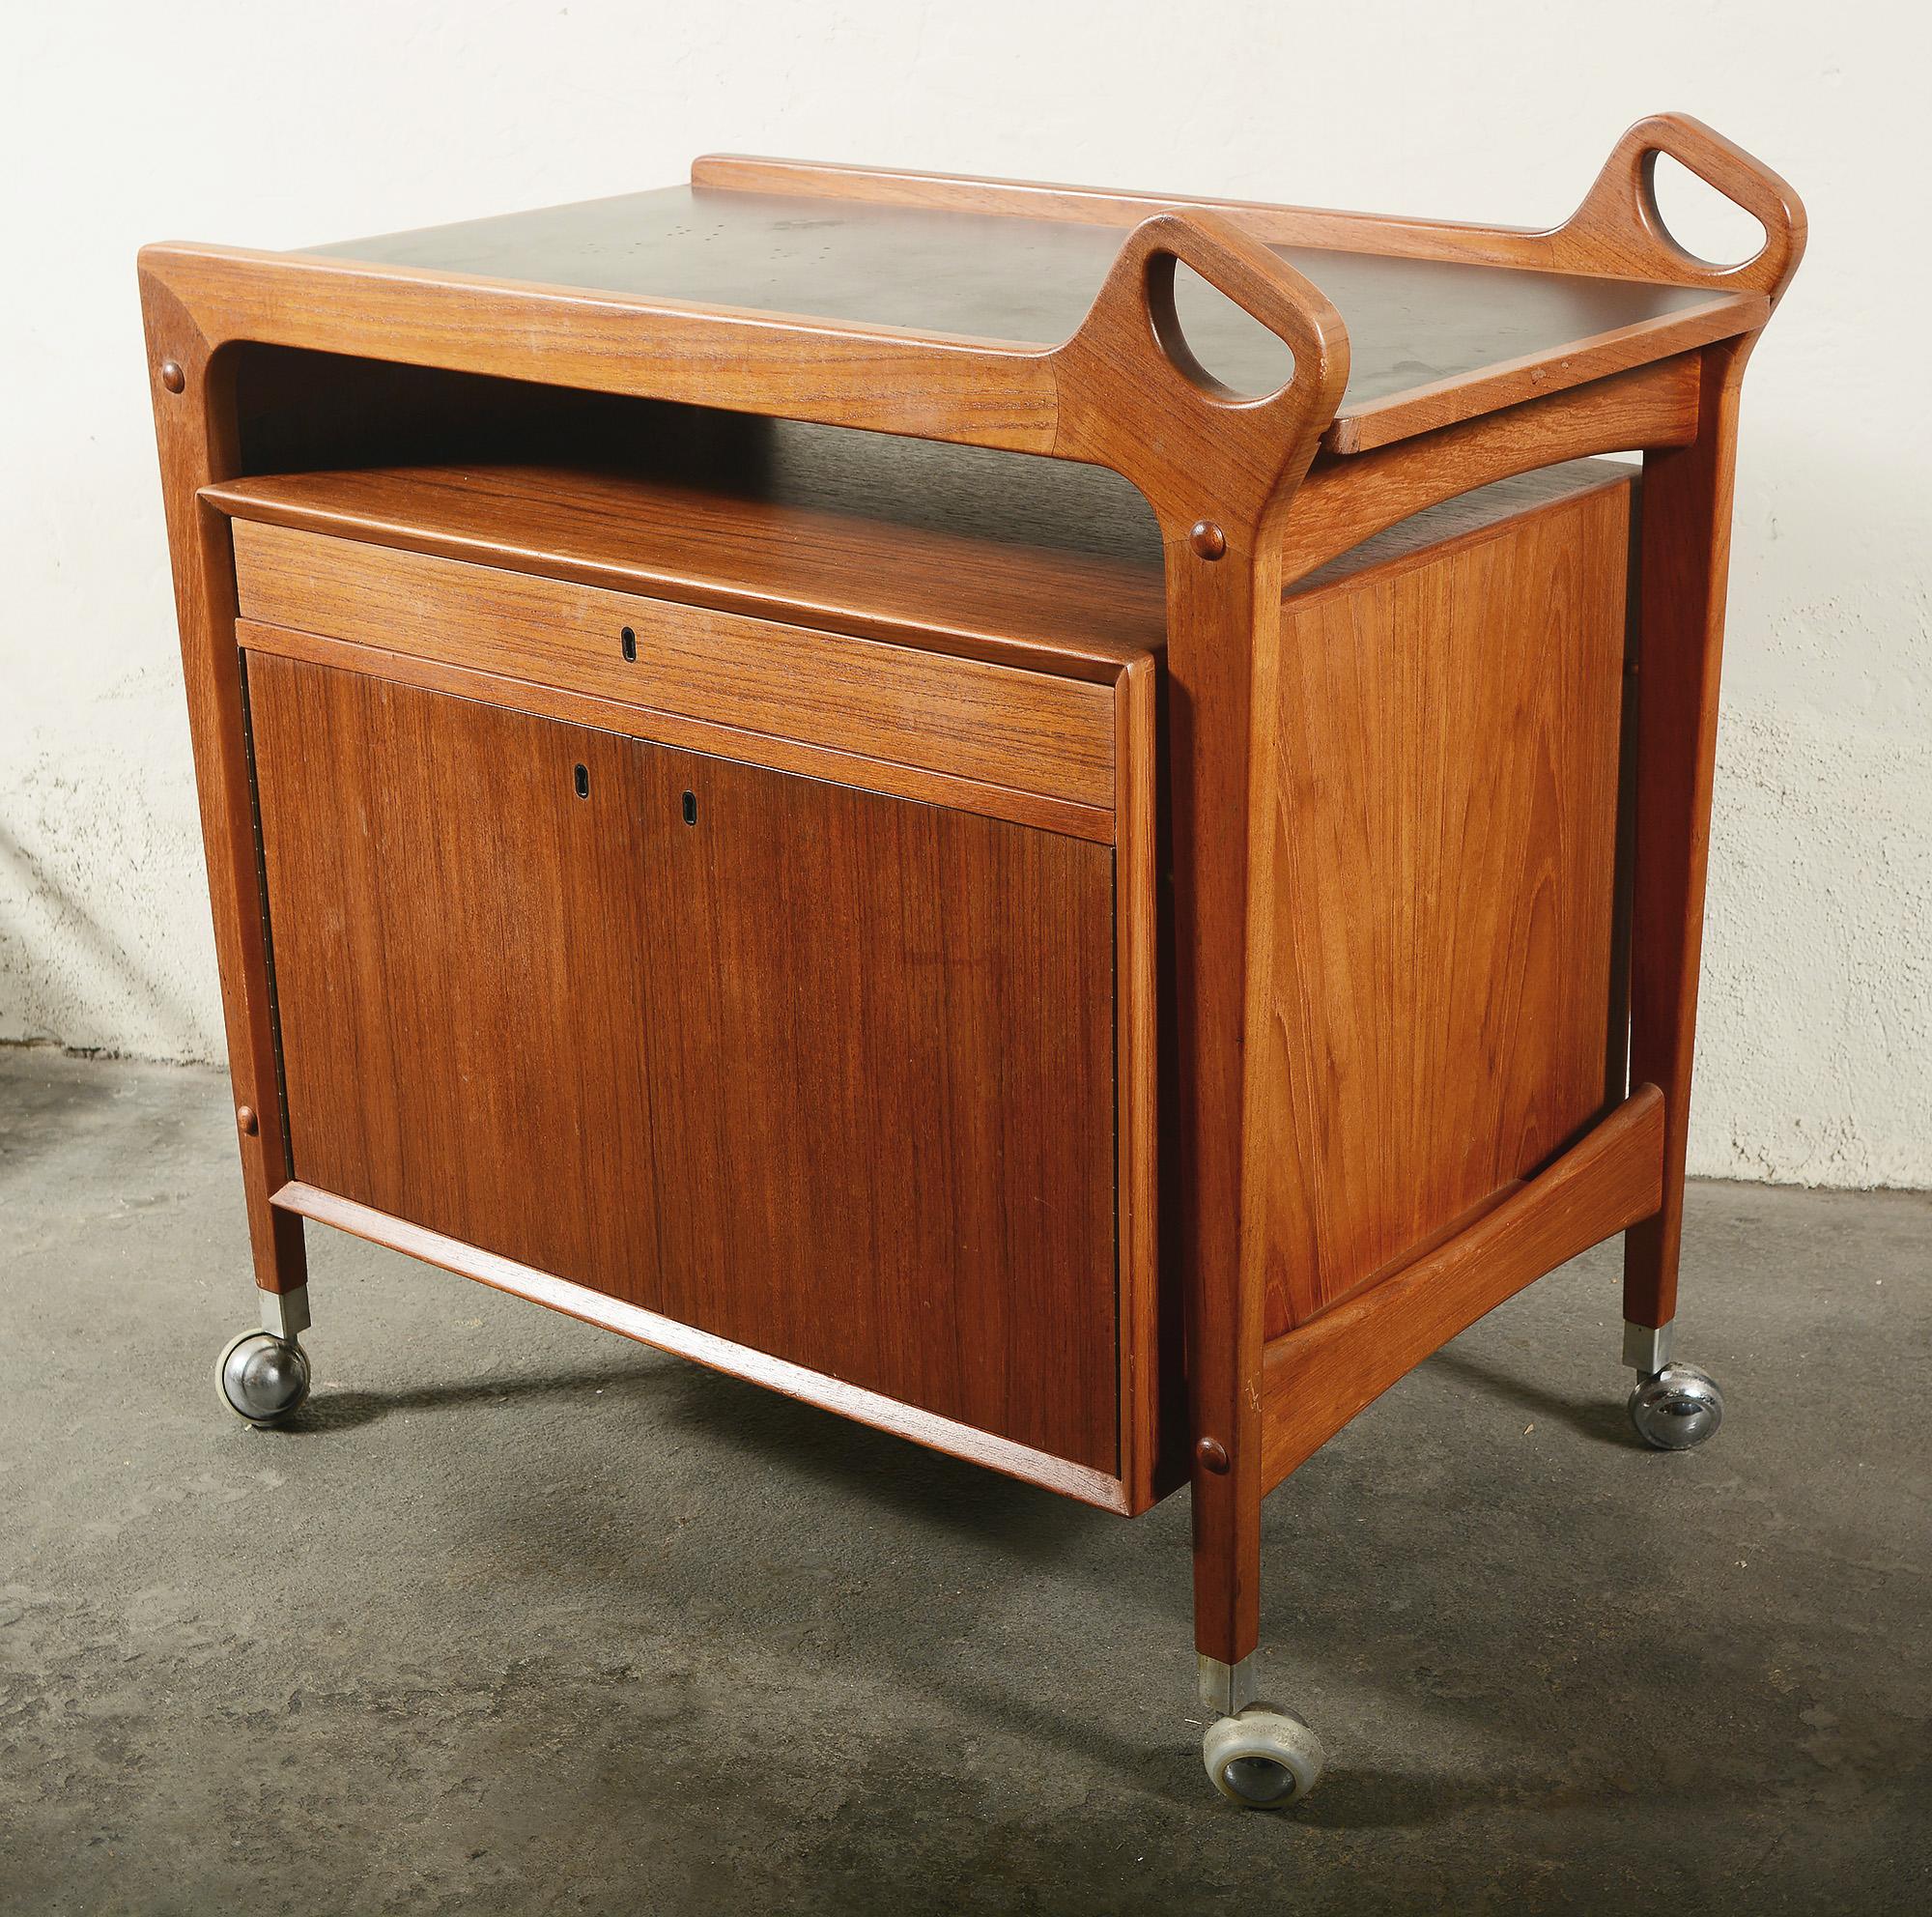 Teak bar cart designed by Johannes Andersen for Dyrlund. This cart has a drop leaf top that when raised makes the top 57 1/8 inches wide. An enclosed cabinet floats below the top. It consists of a divided drawer and two cabinet doors. One side of